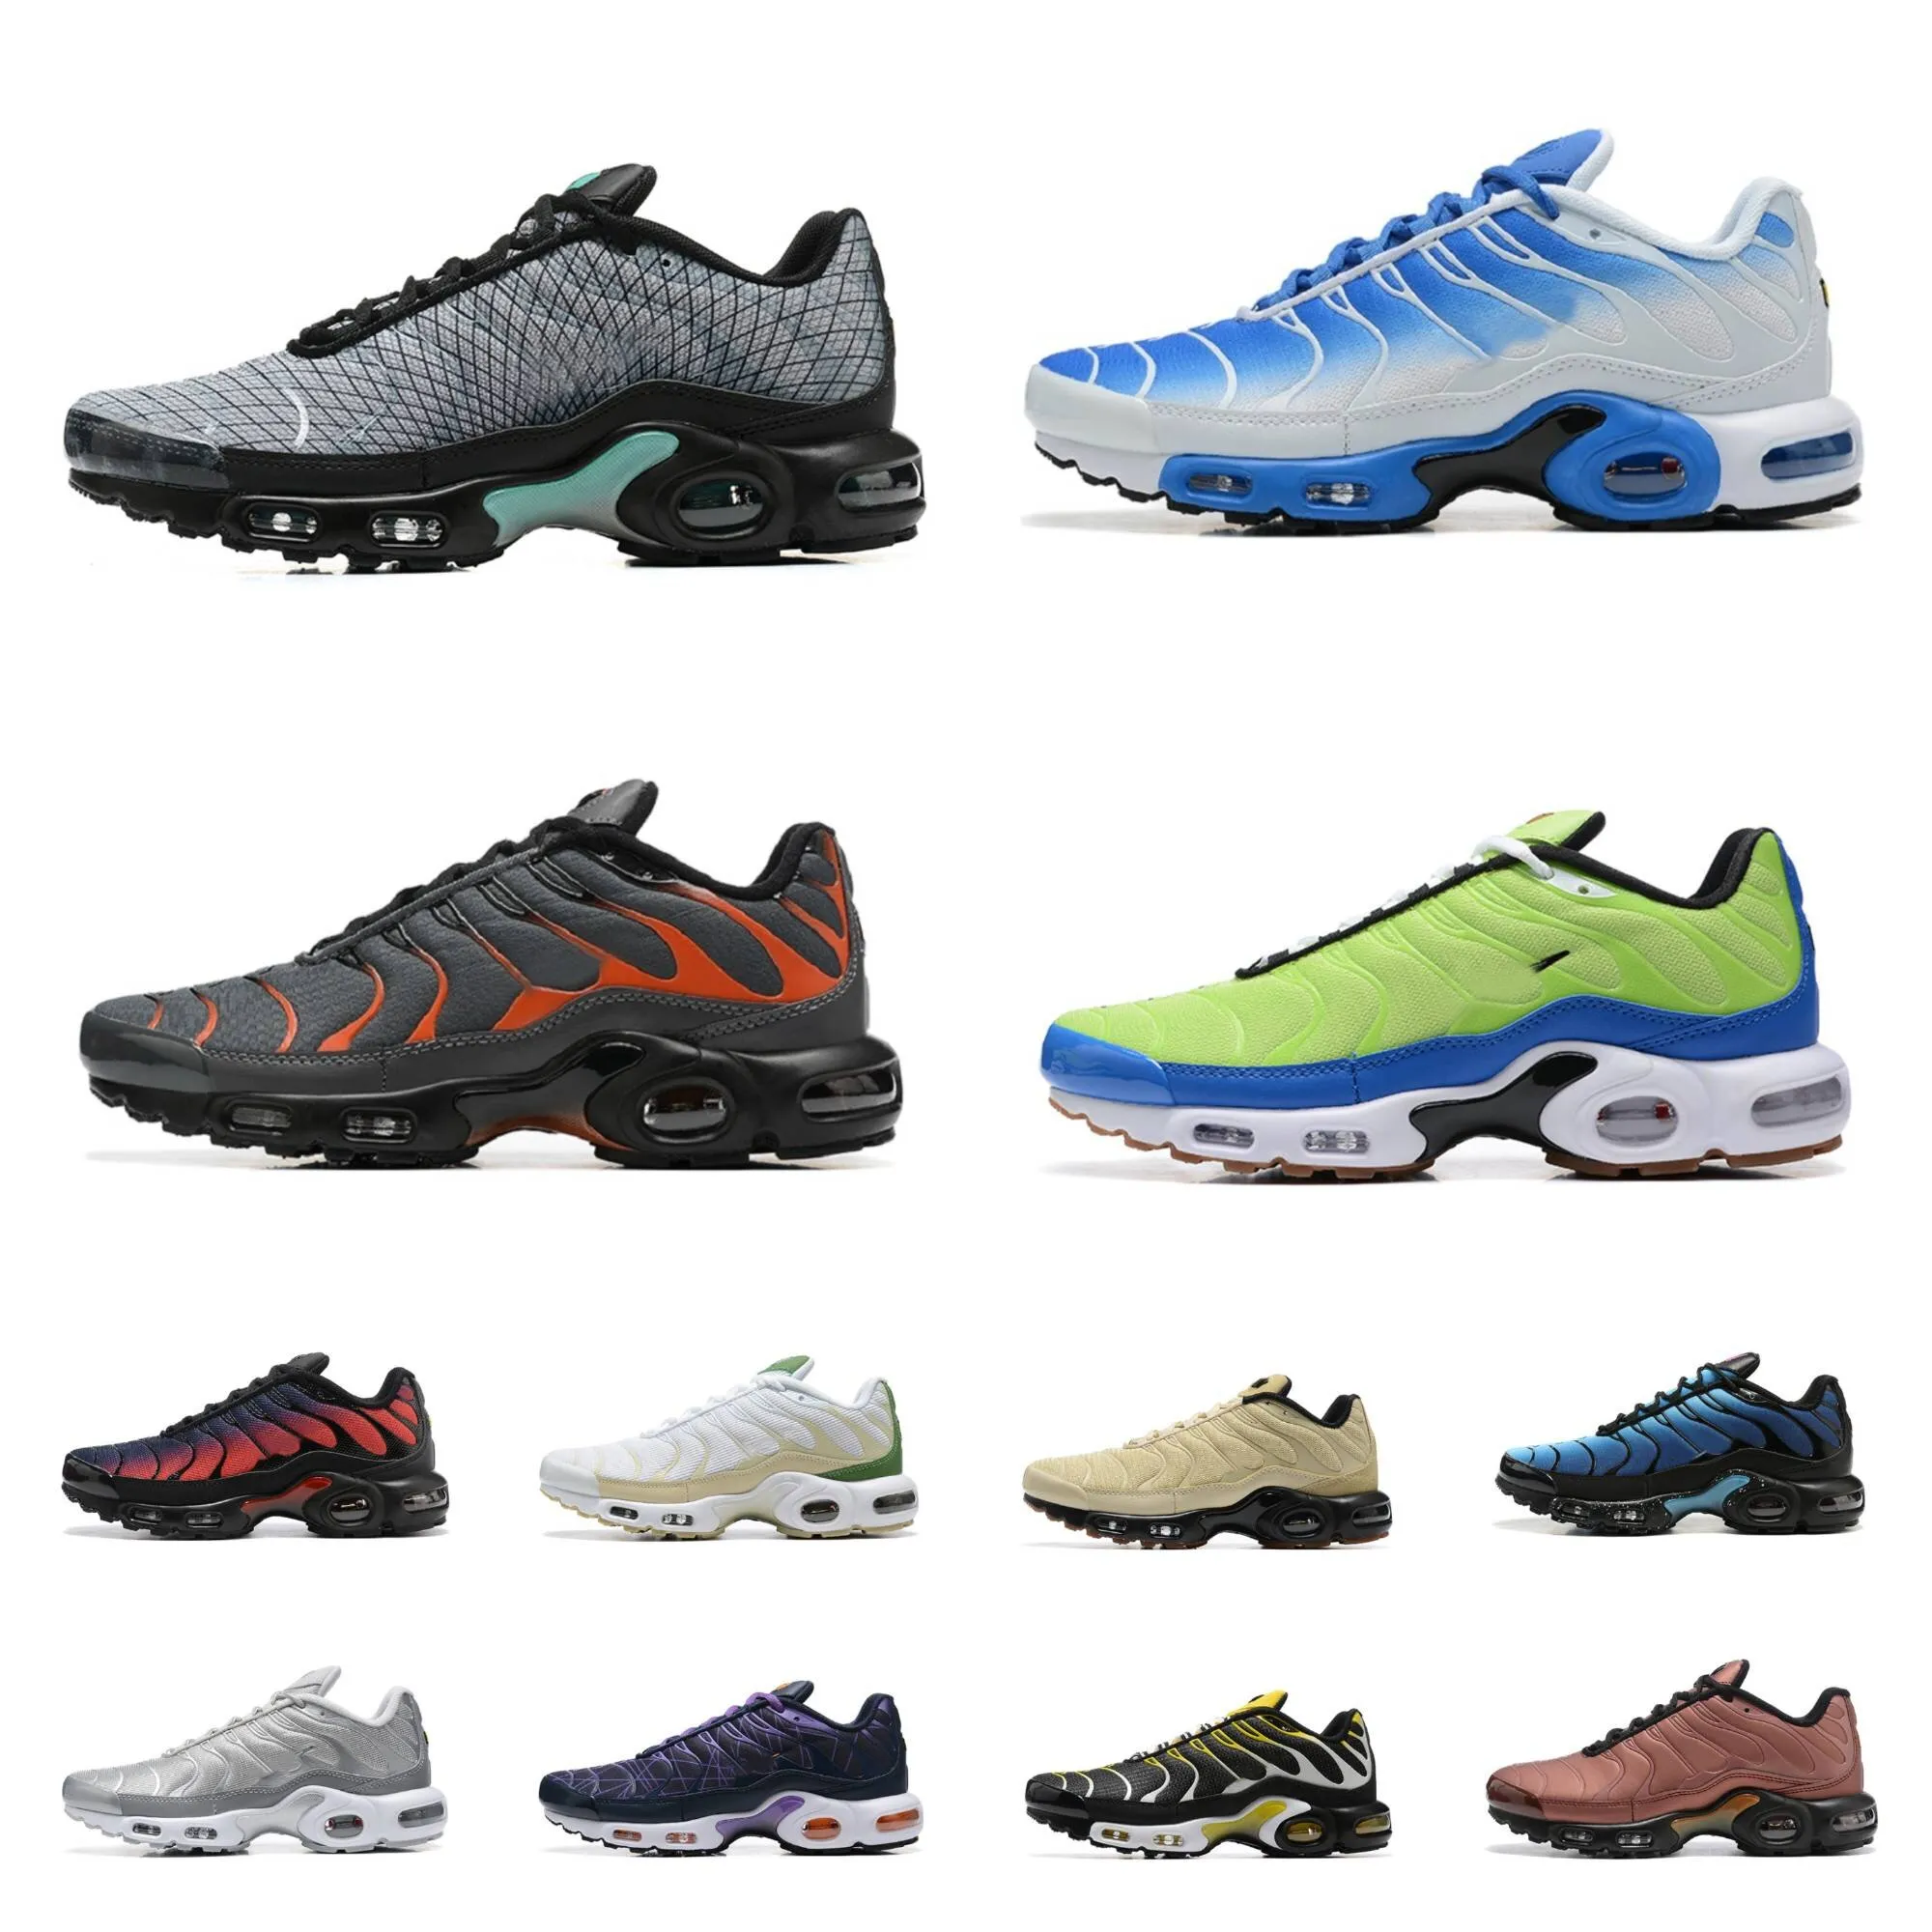 2023 AIR plus Max TN Running Shoes Heren AirMaxs TNS Terrascape Black Antracite Mint Green University Blue Unity Reflective Bred Bred Chausure Requin Sneakers Trainers